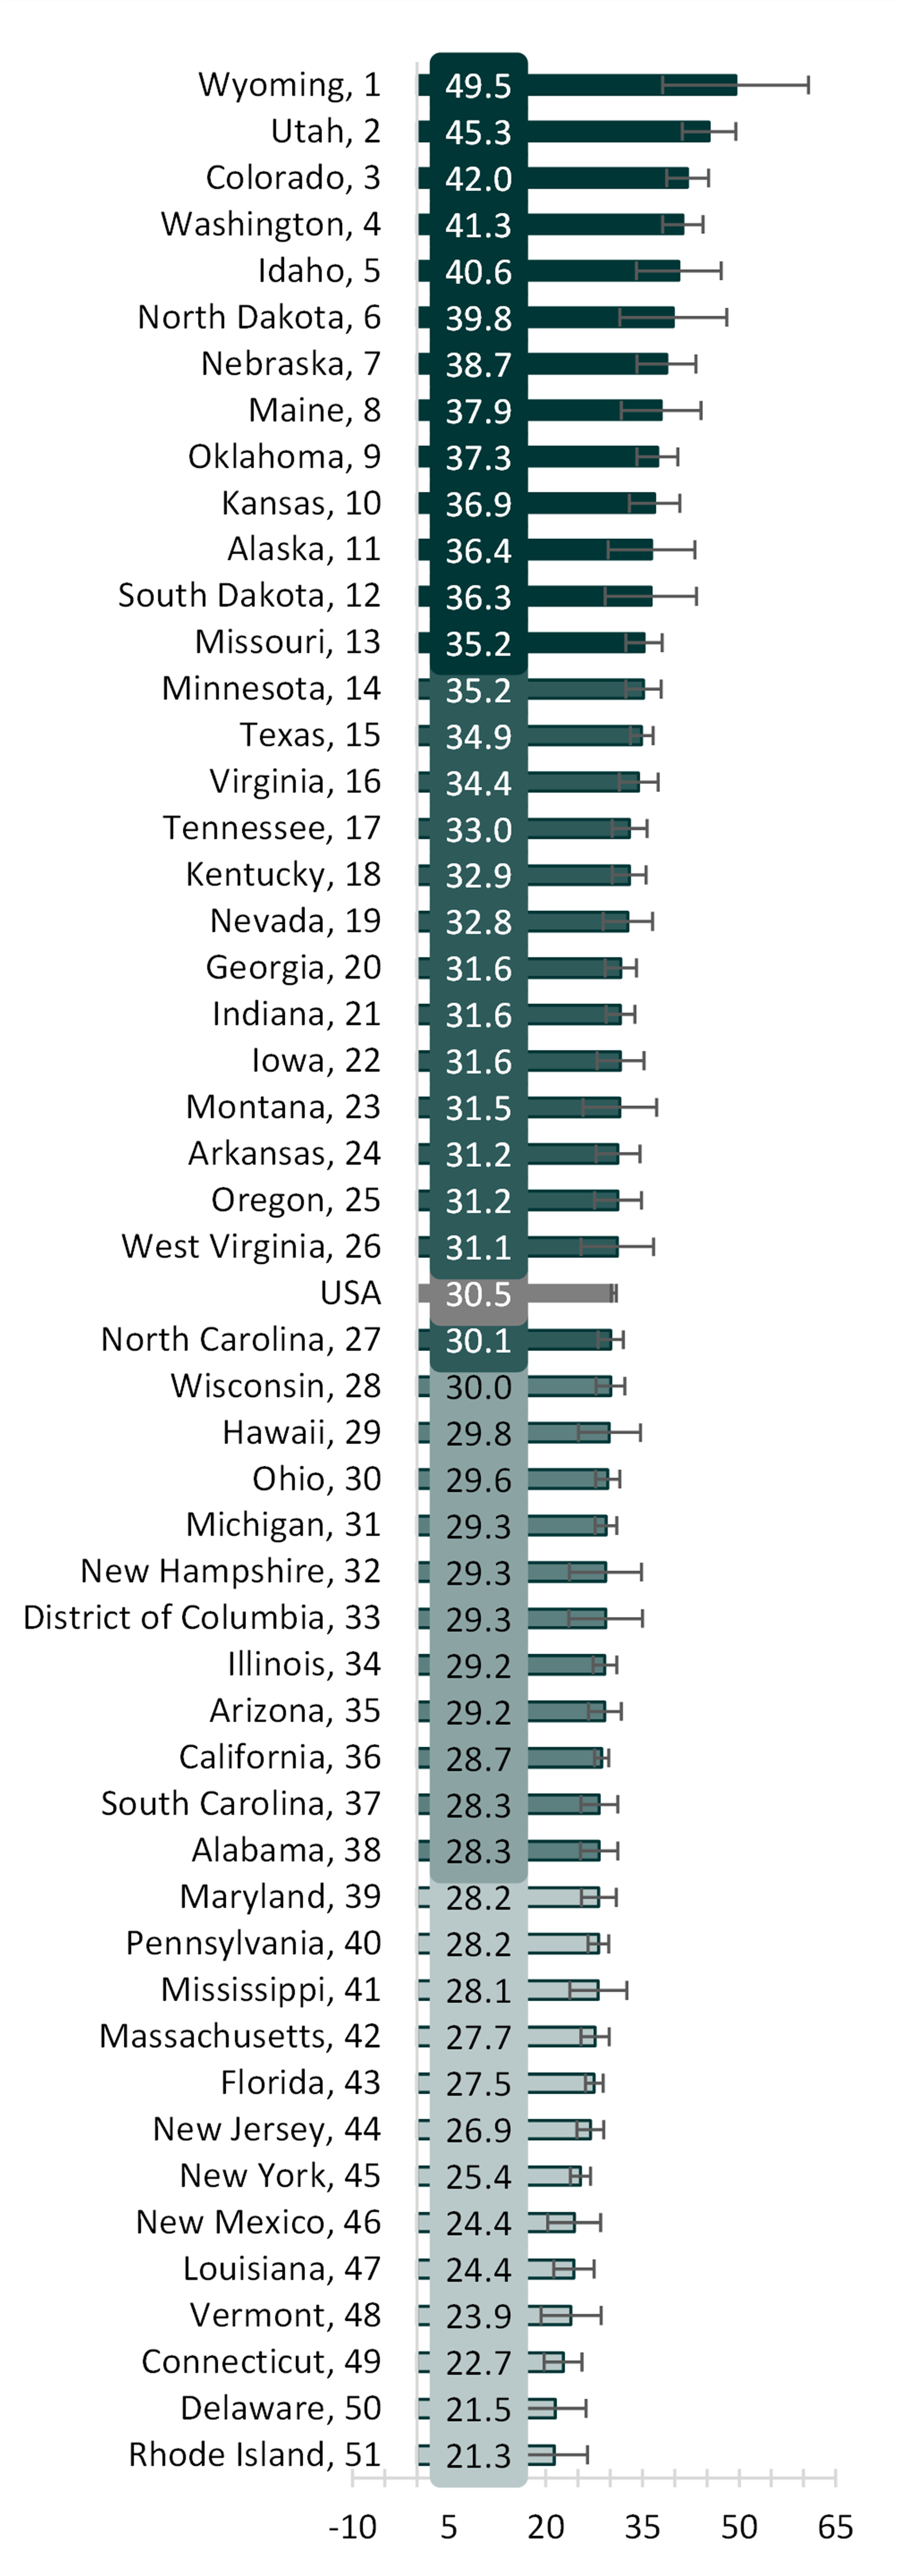 shades of teal table showing state variation in adjusted marriage rate per 1k unmarried women aged 15+